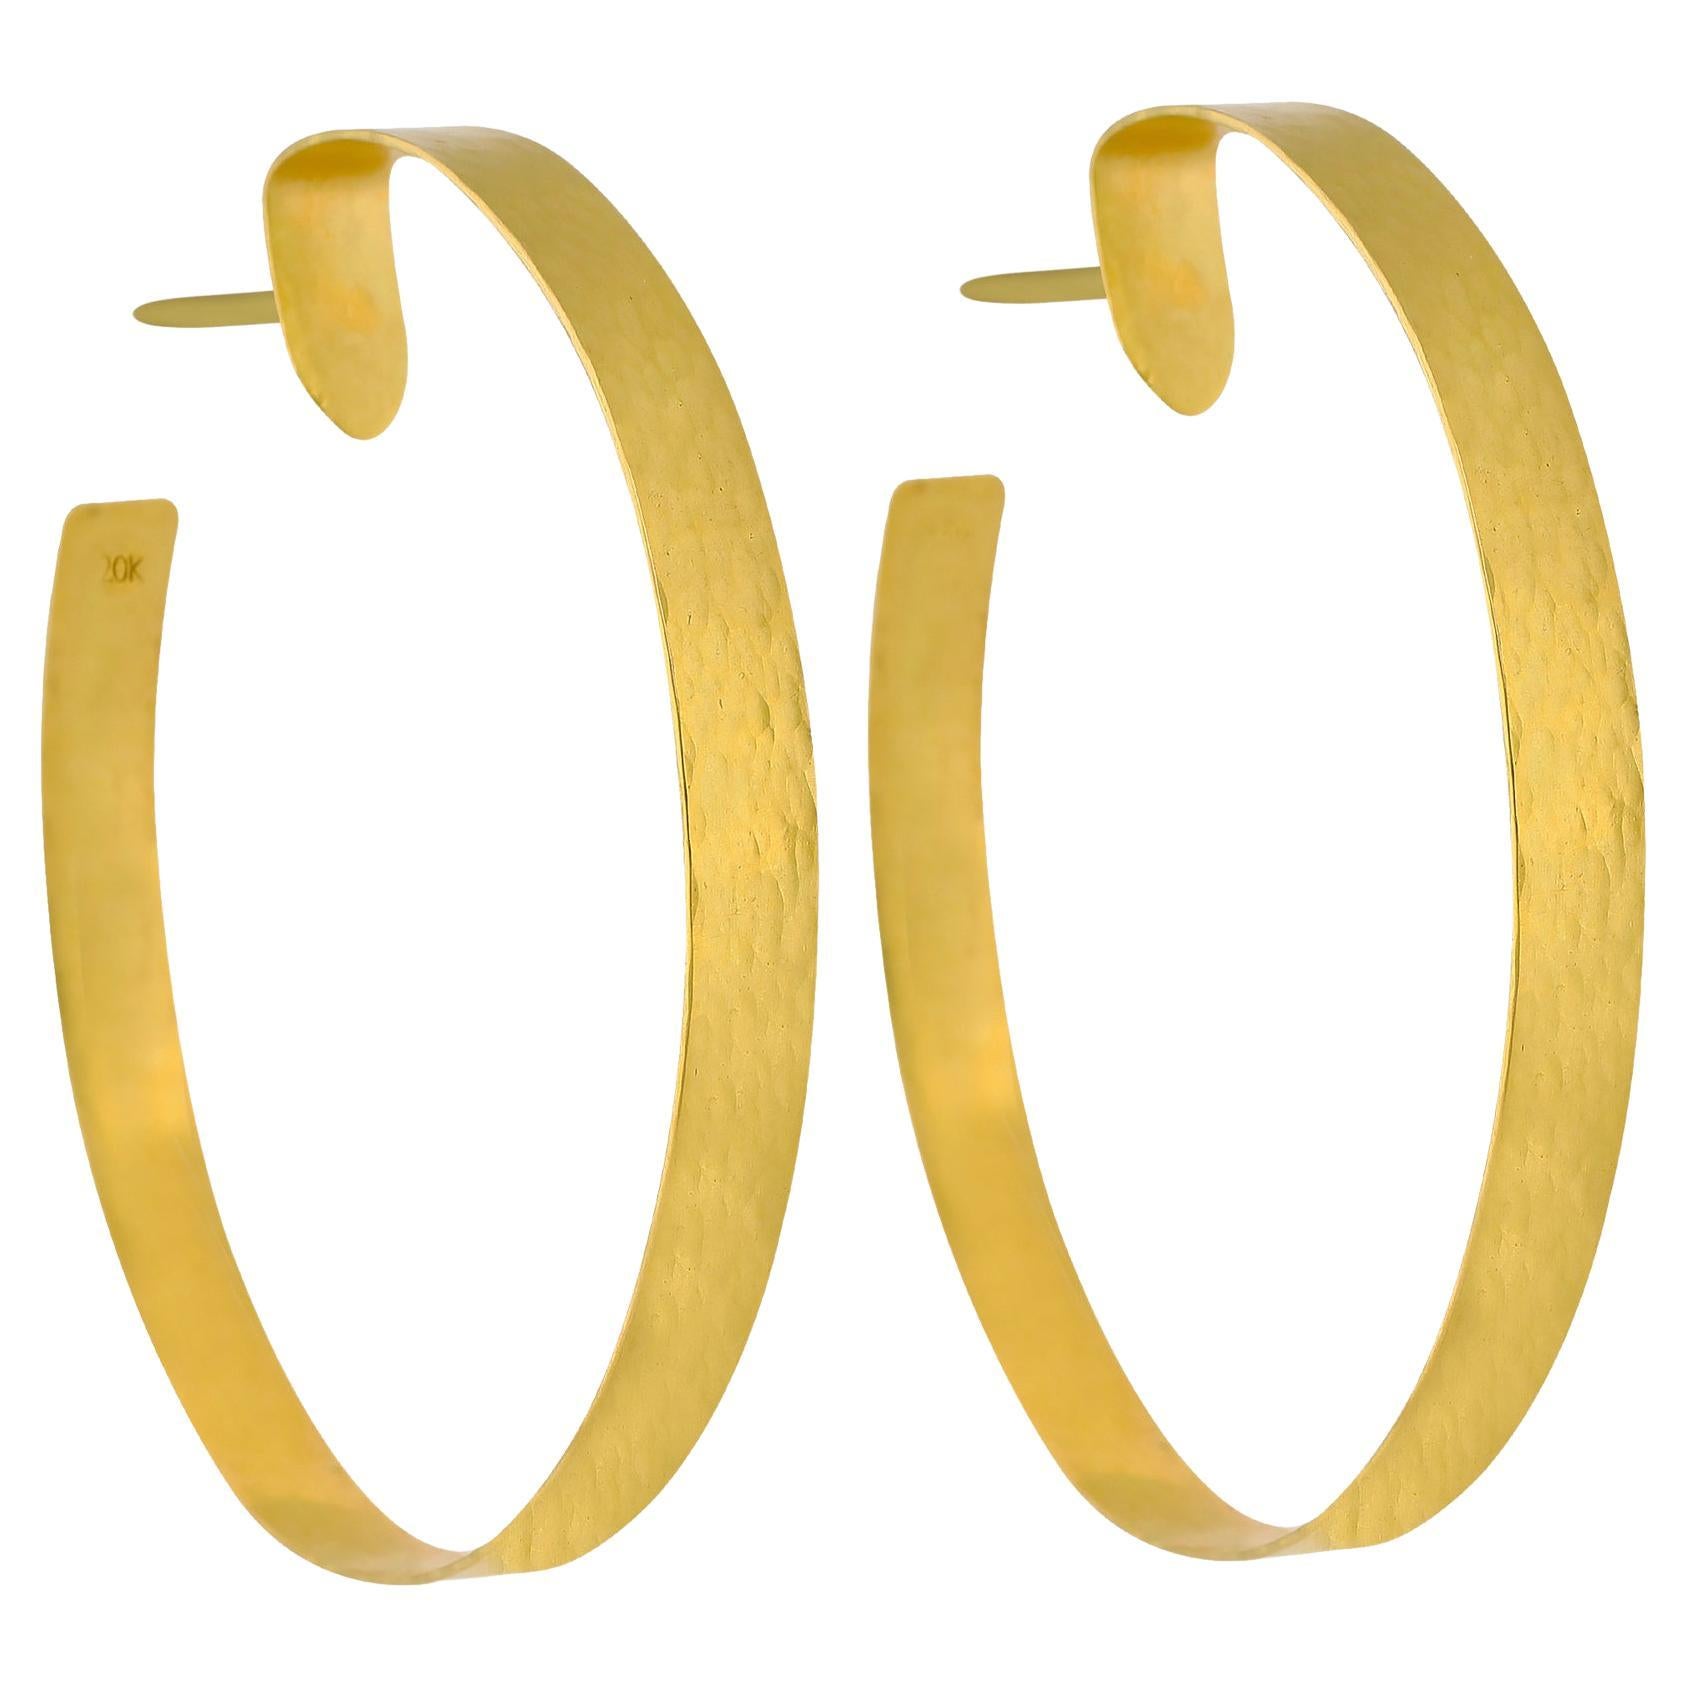 PHILIPPE SPENCER Solid 20K Gold 2" Inch Hand-Forged & Hammered Hoop Earrings